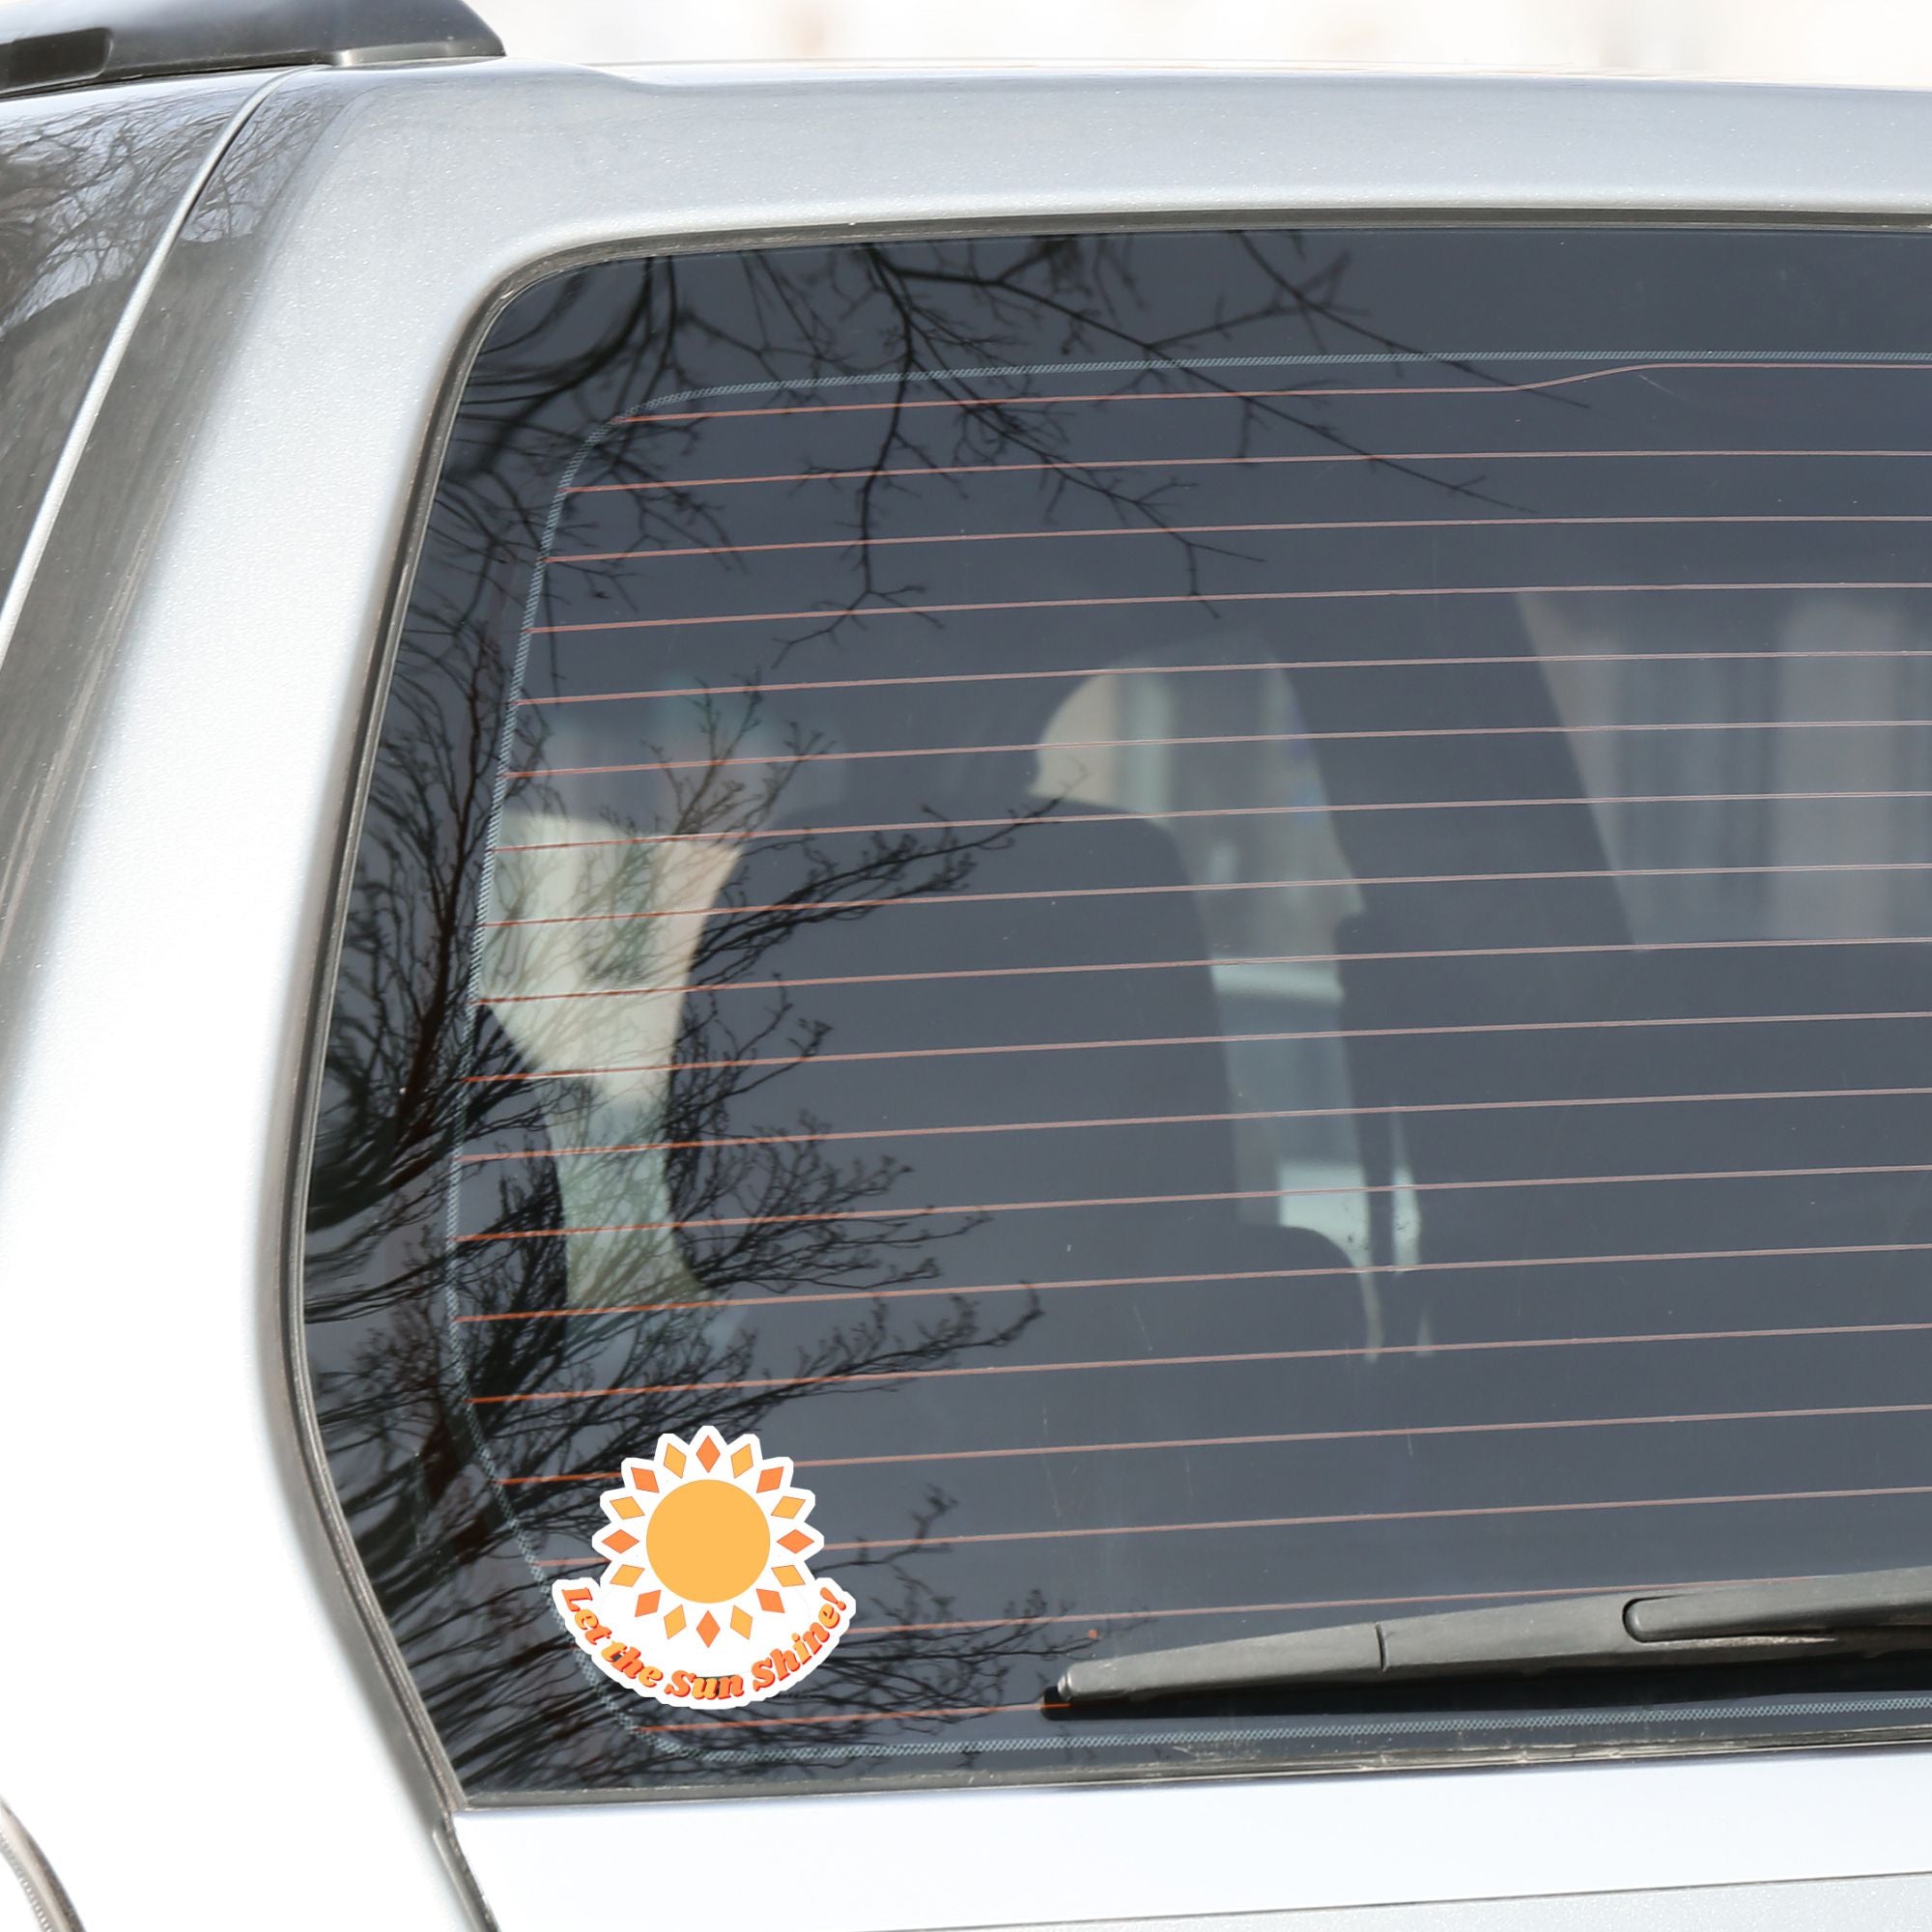 Let the Sun Shine! This bright and fun individual die-cut sticker features a yellow and orange sun with the words "Let the Sun Shine!" below. This image shows the Let the Sun Shine! die-cut sticker on the back window of a car.